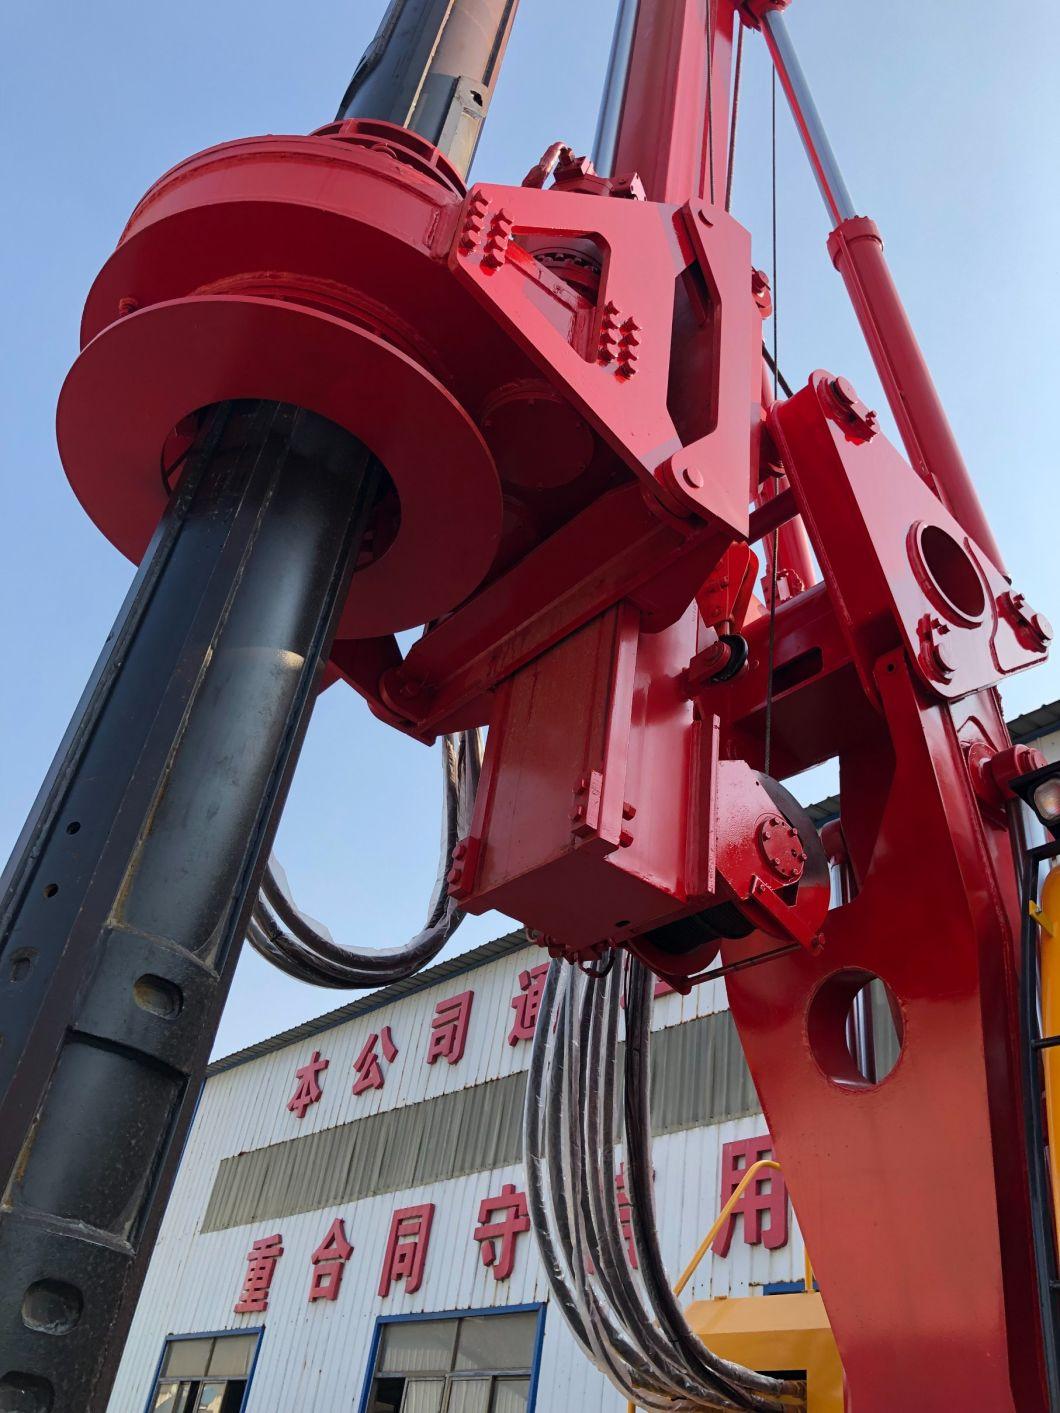 Yahe Heavy Industry Building Construction Machine Rotary Drilling Rig